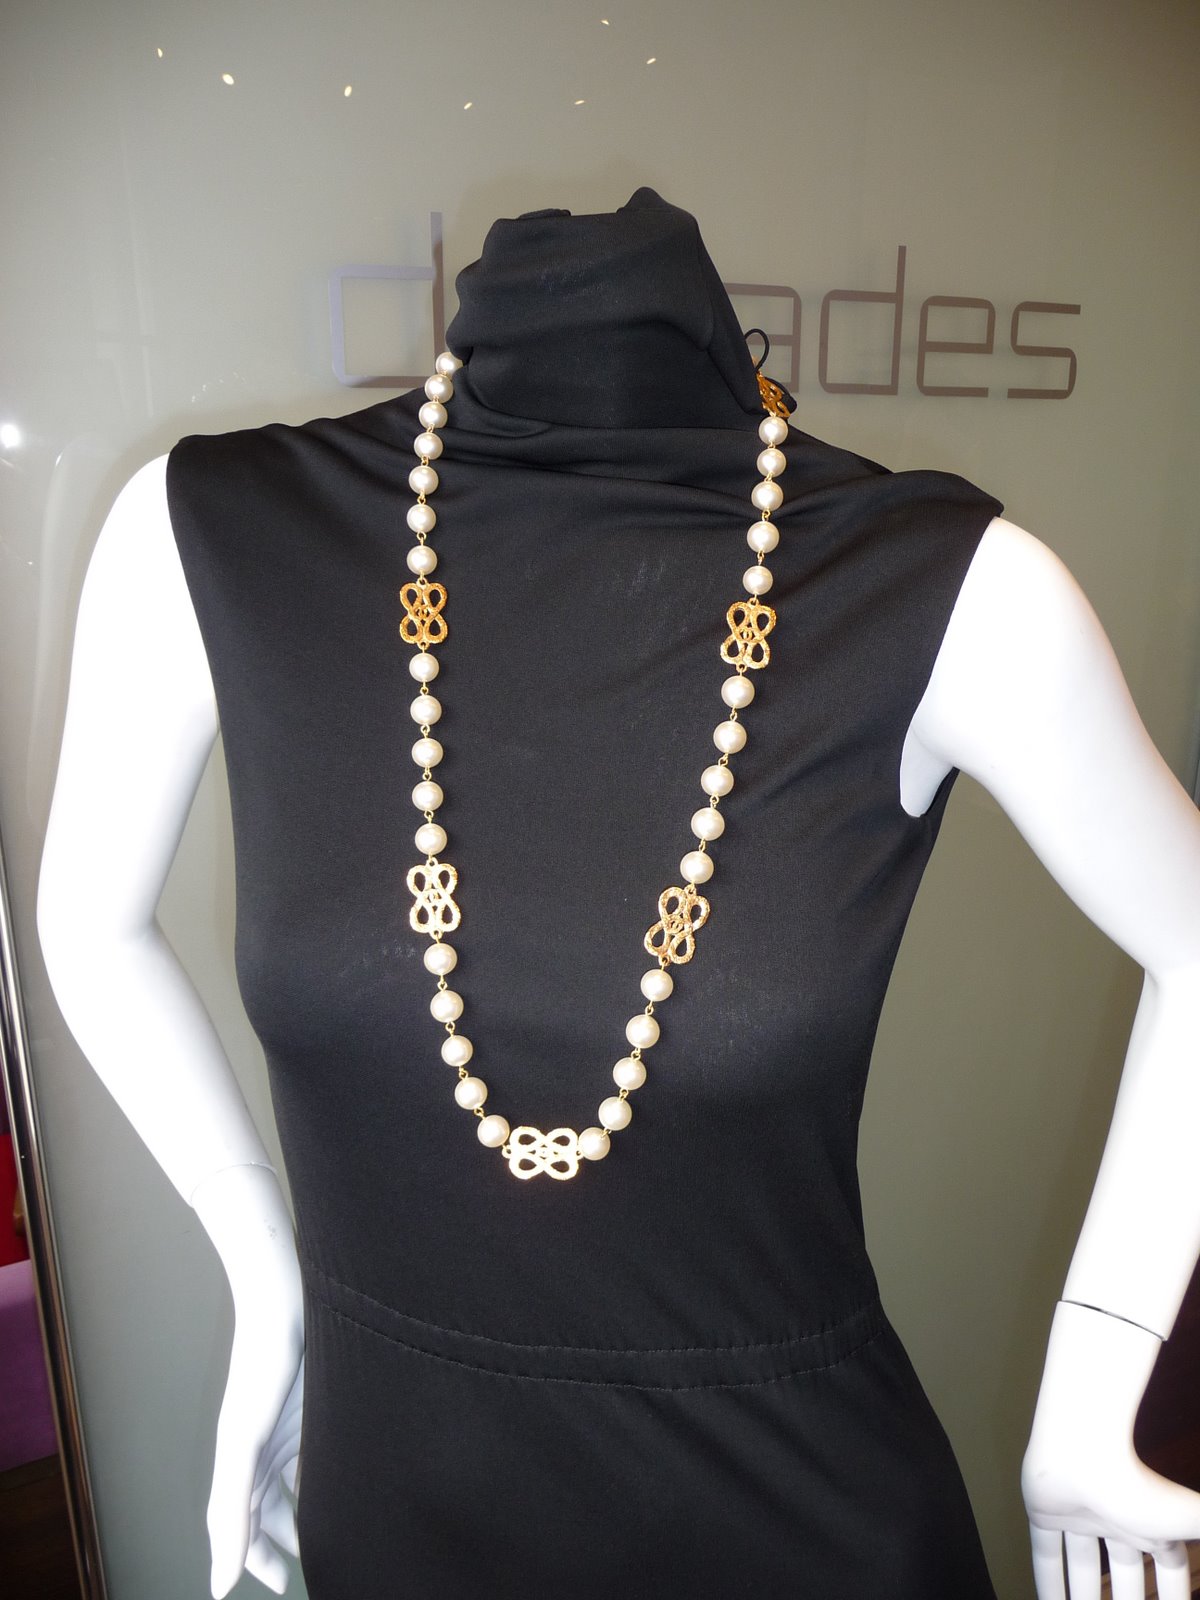 [CHANEL+PEARLS+WITH+SCROLL+PATTERN+COLLECTION+25+32+INCHES.JPG.JPG]